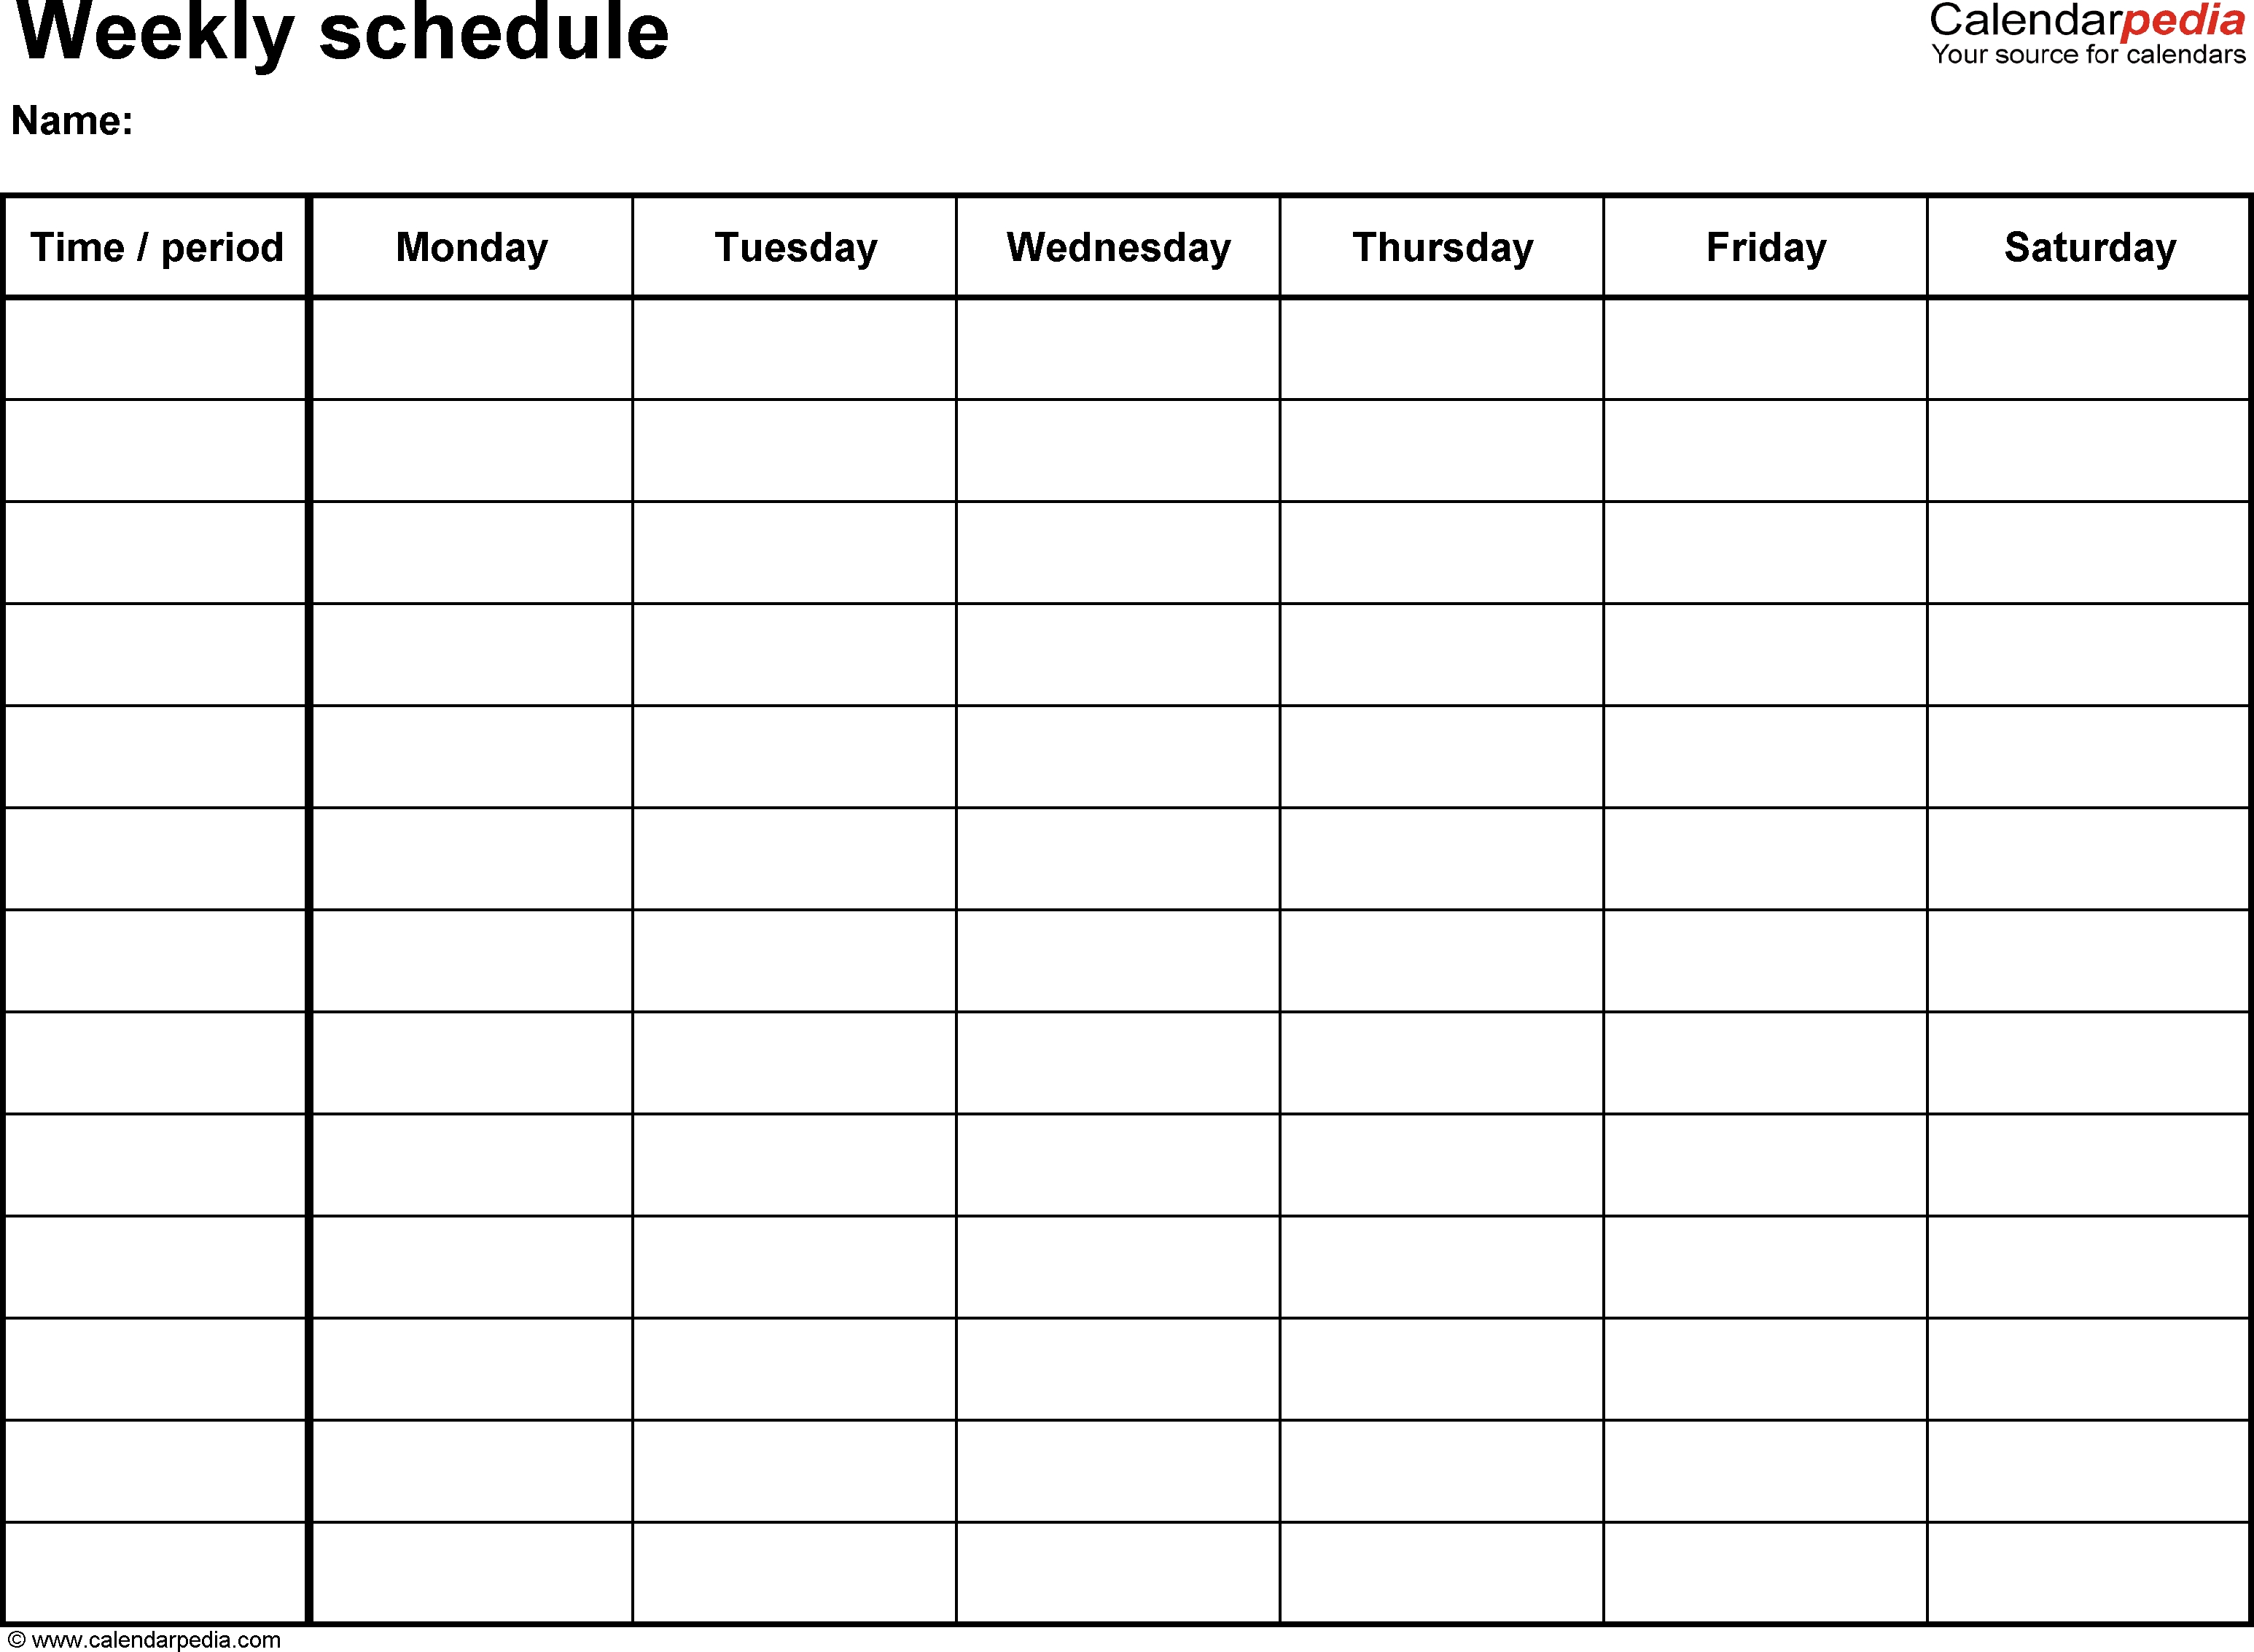 Free Weekly Schedule Templates For Word - 18 Templates inside Blank Monday Through Friday Weekly Calendar Without Download